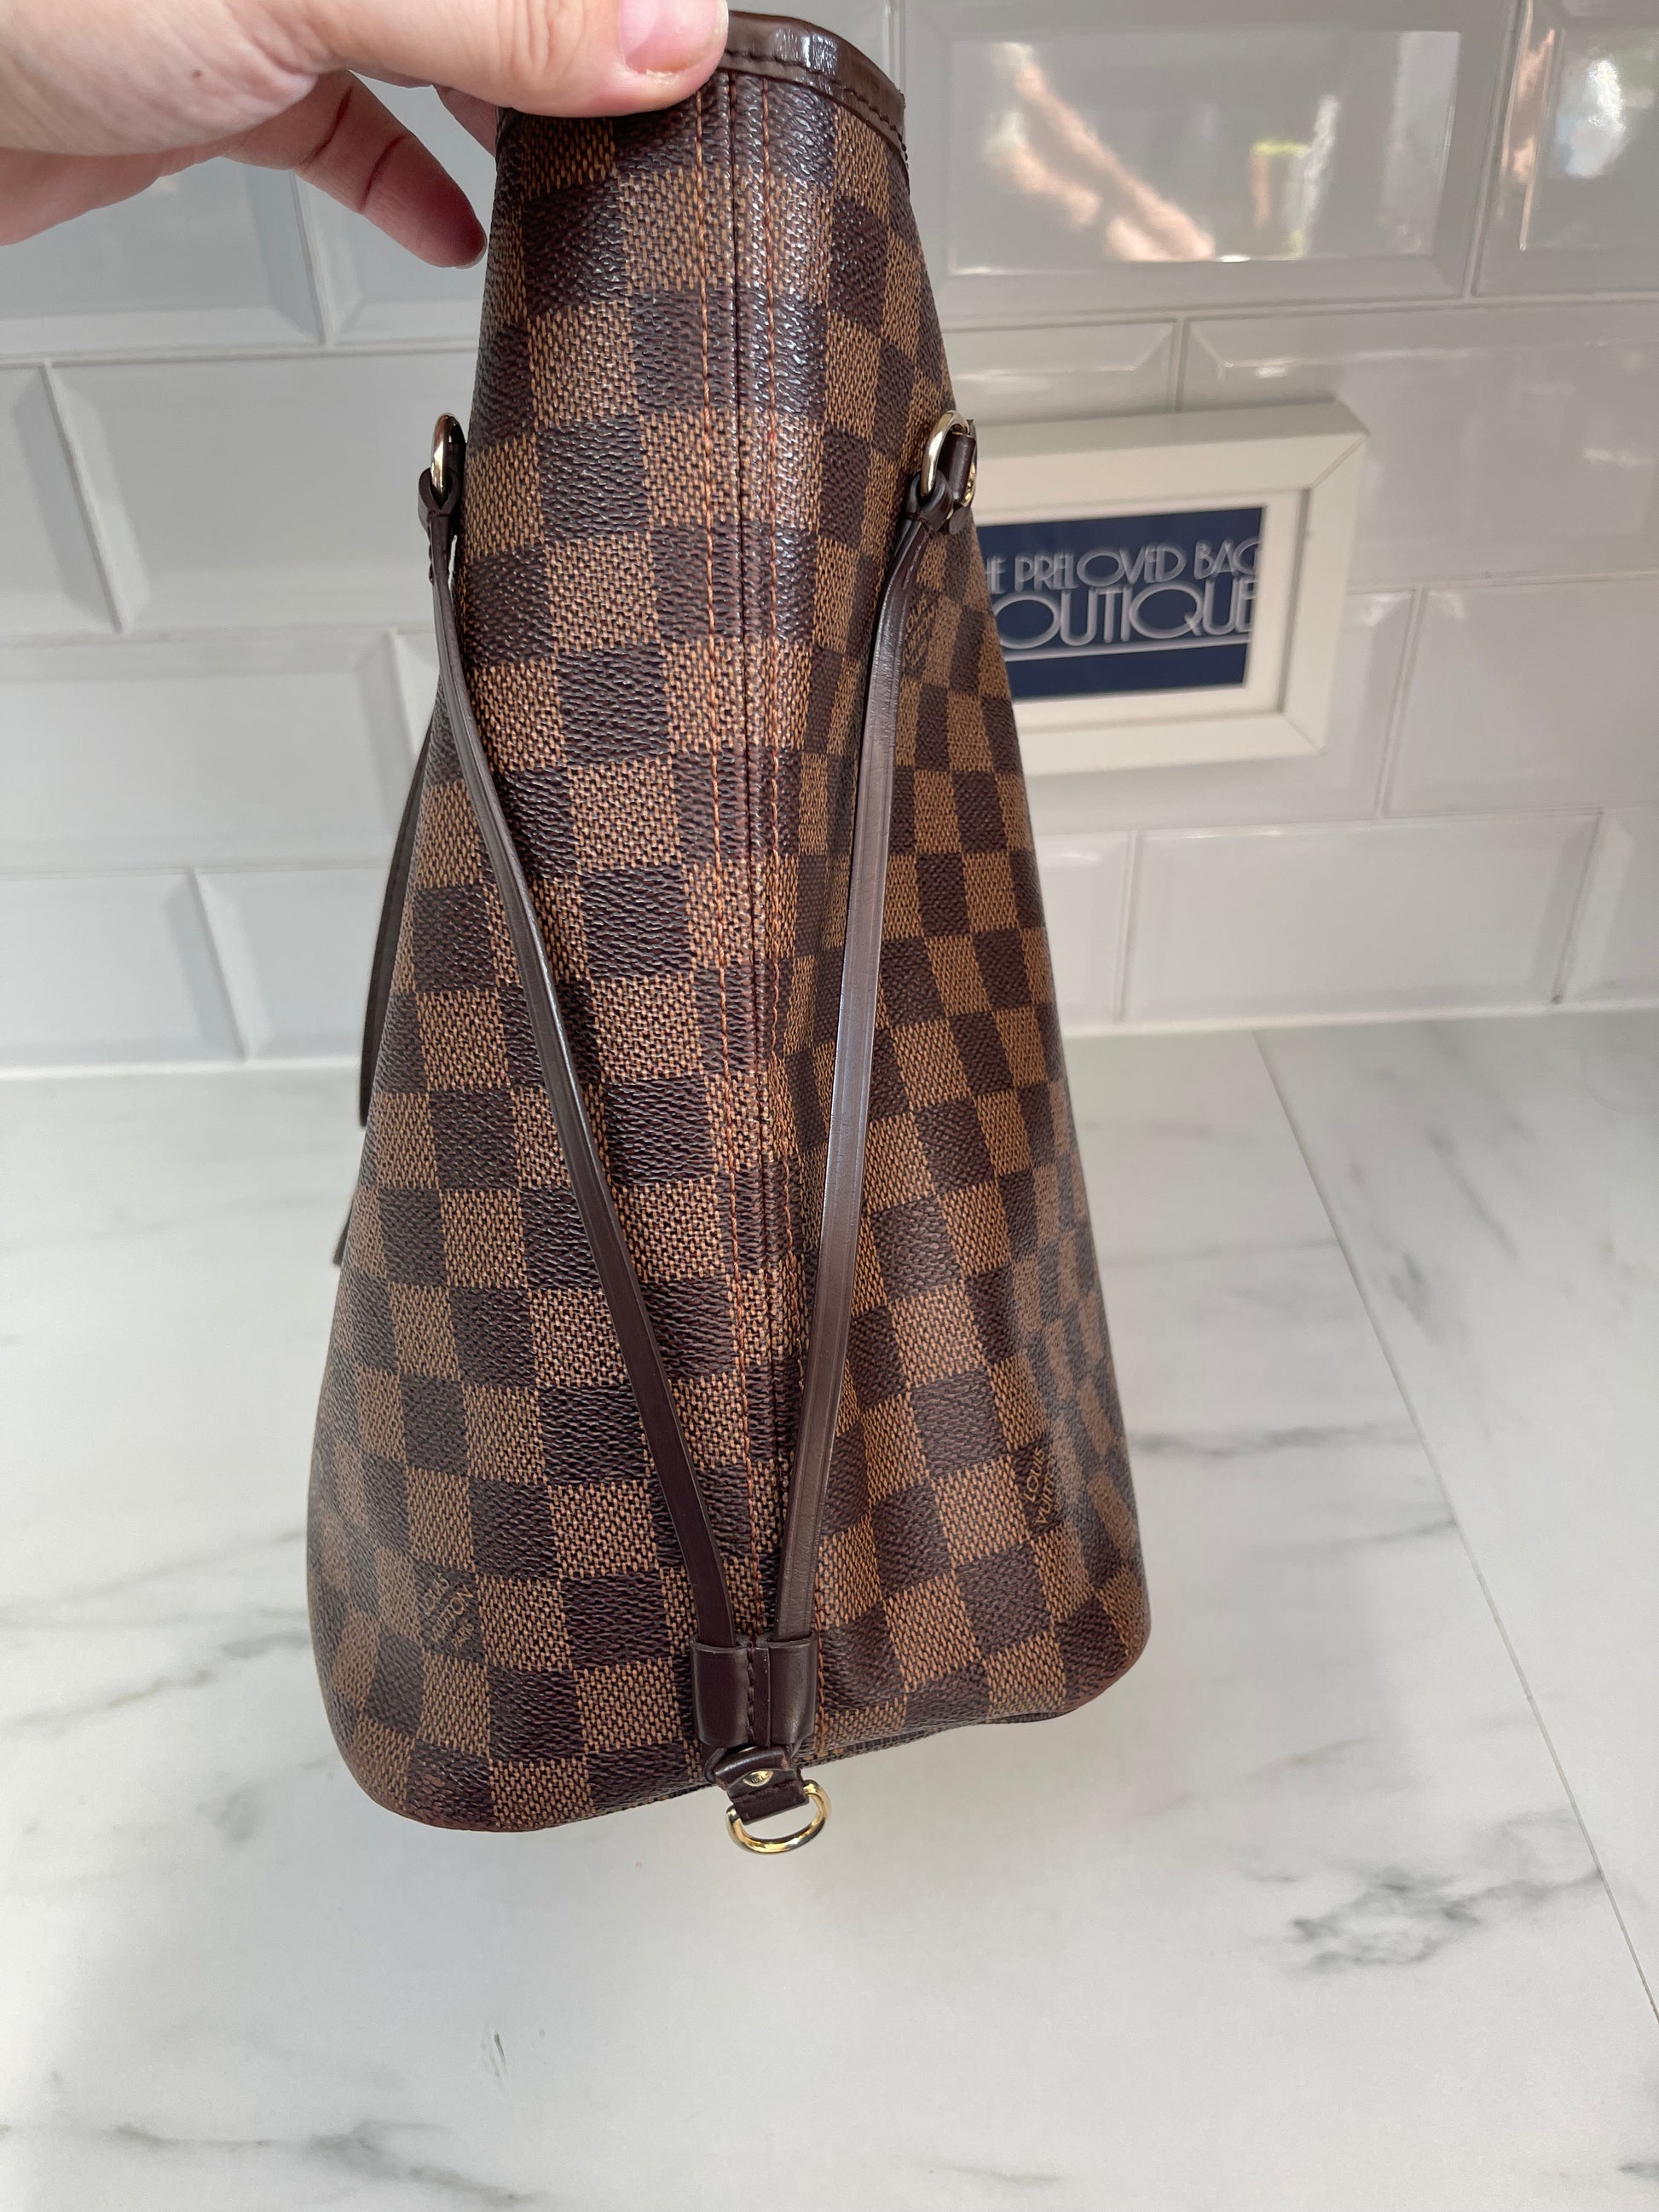 Louis Vuitton Neverfull MM Damier Ebene Tote - A World Of Goods